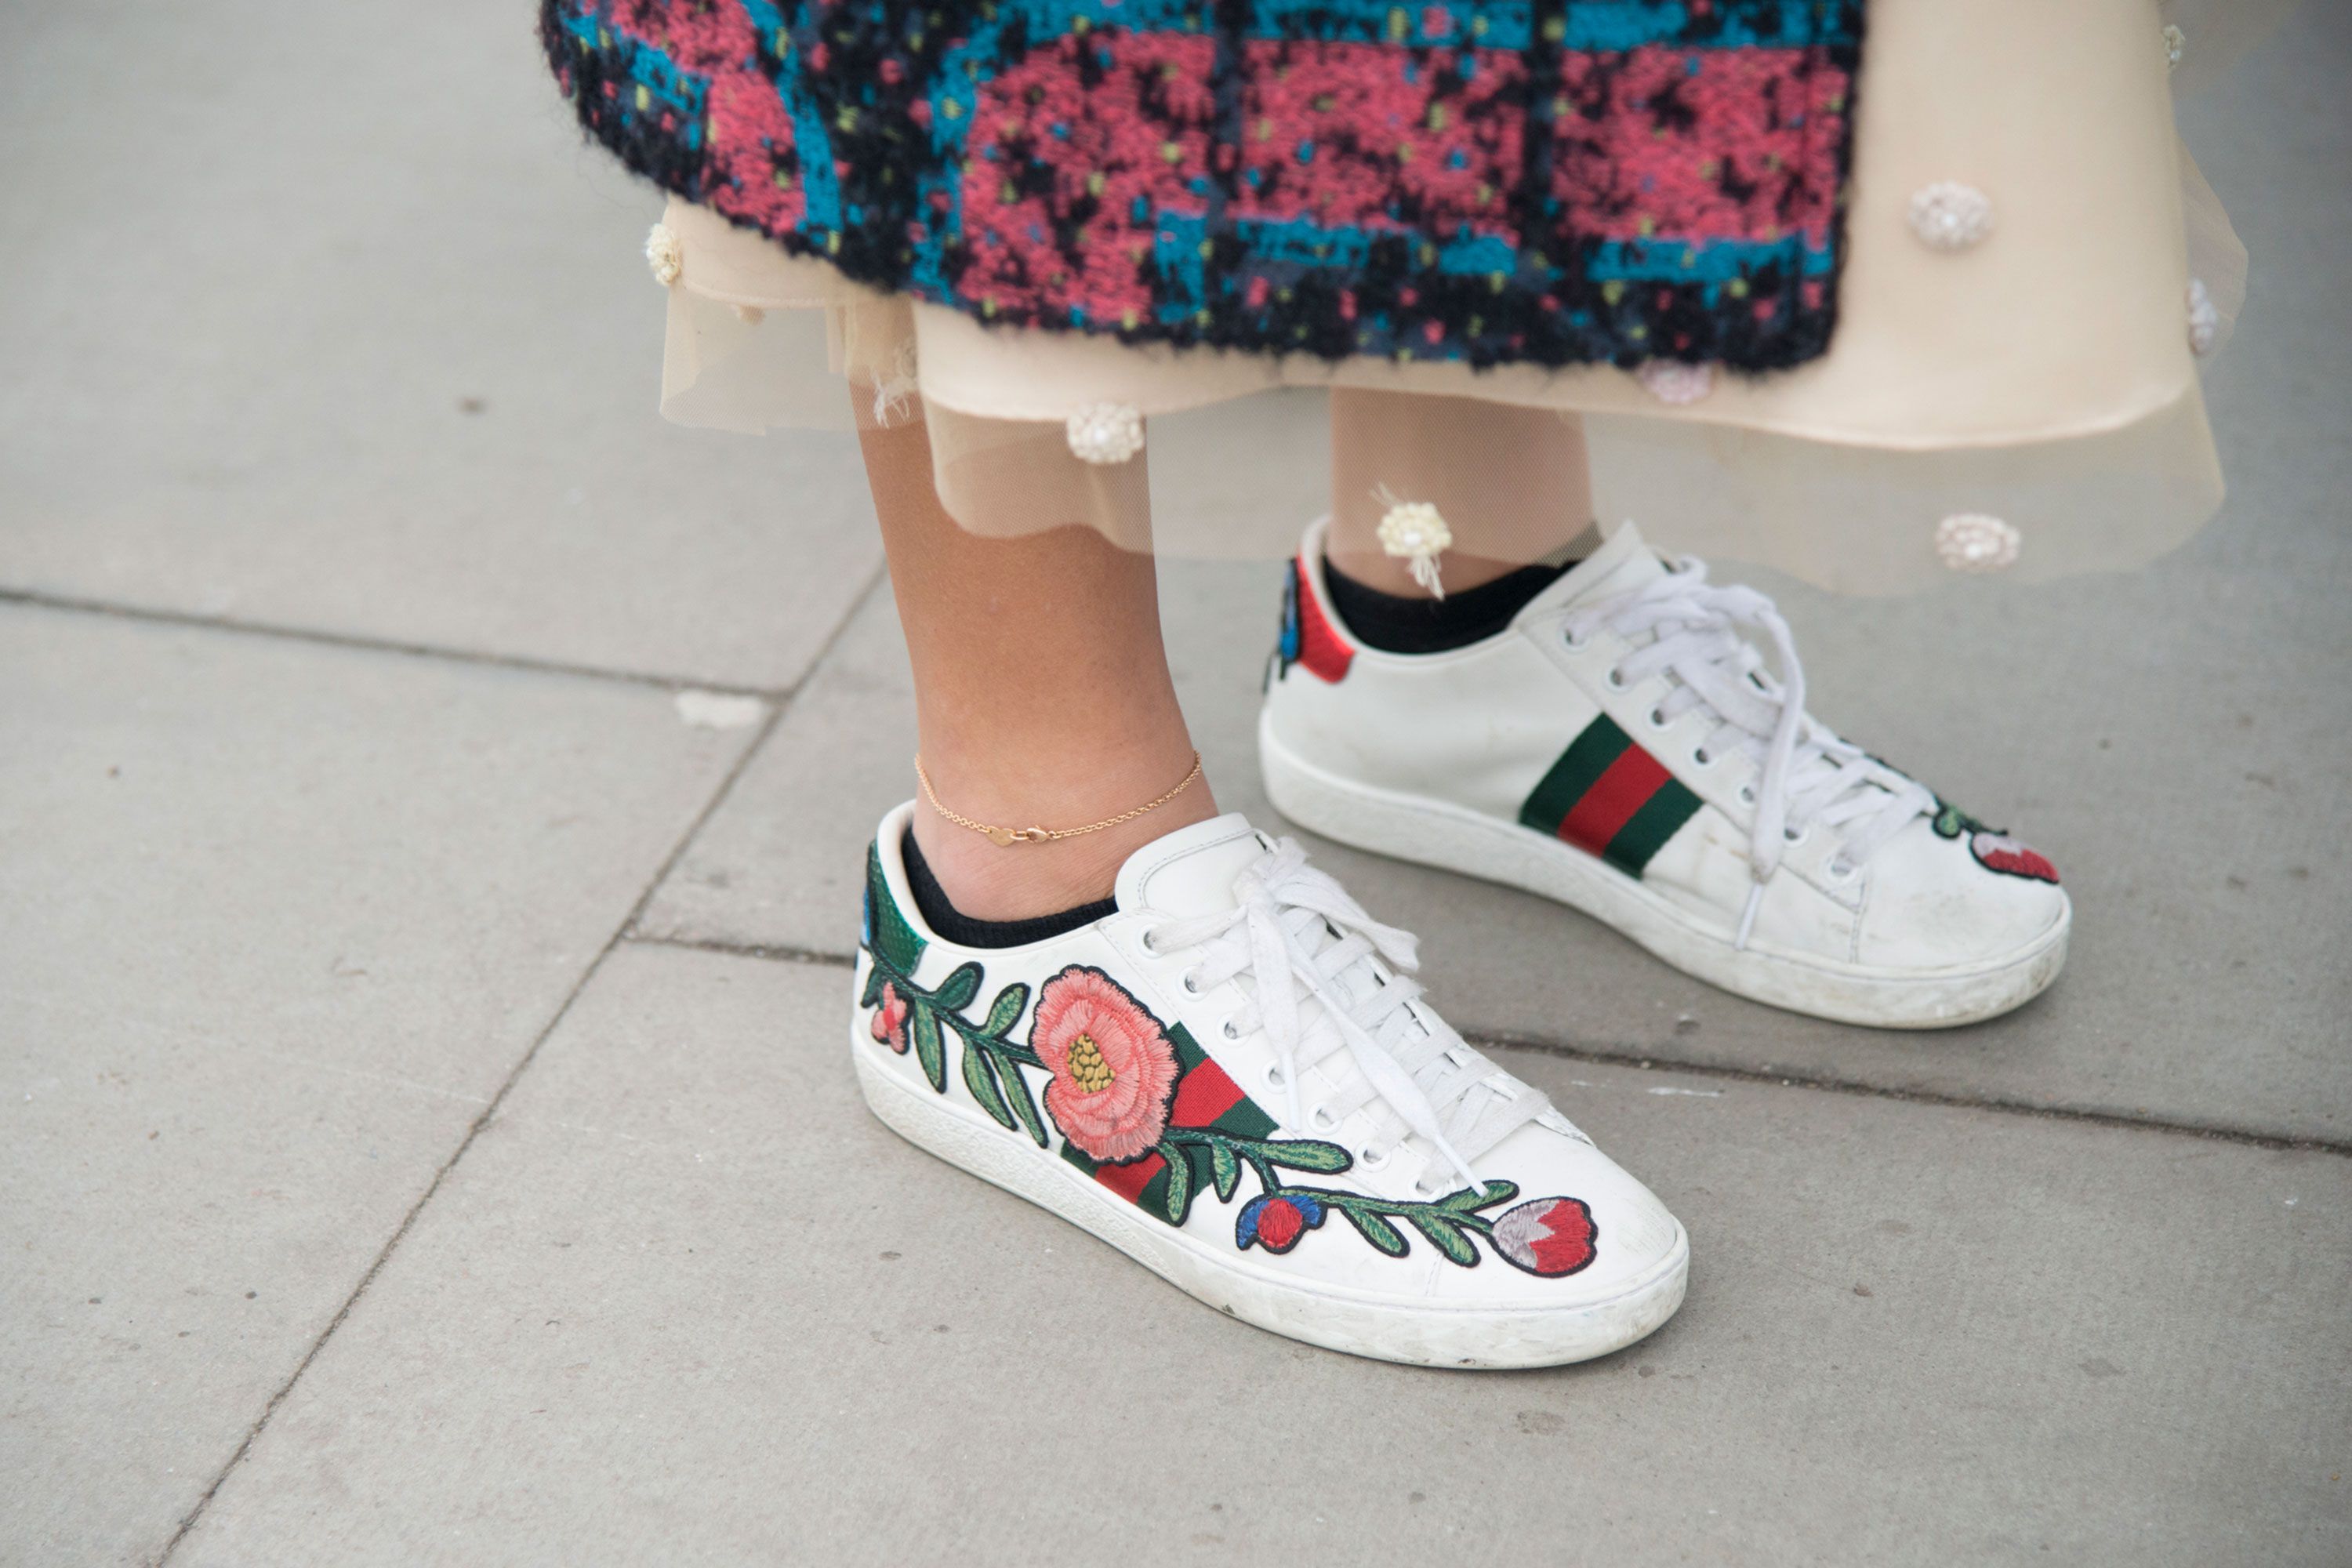 Robots are making Gucci's new-season trainers